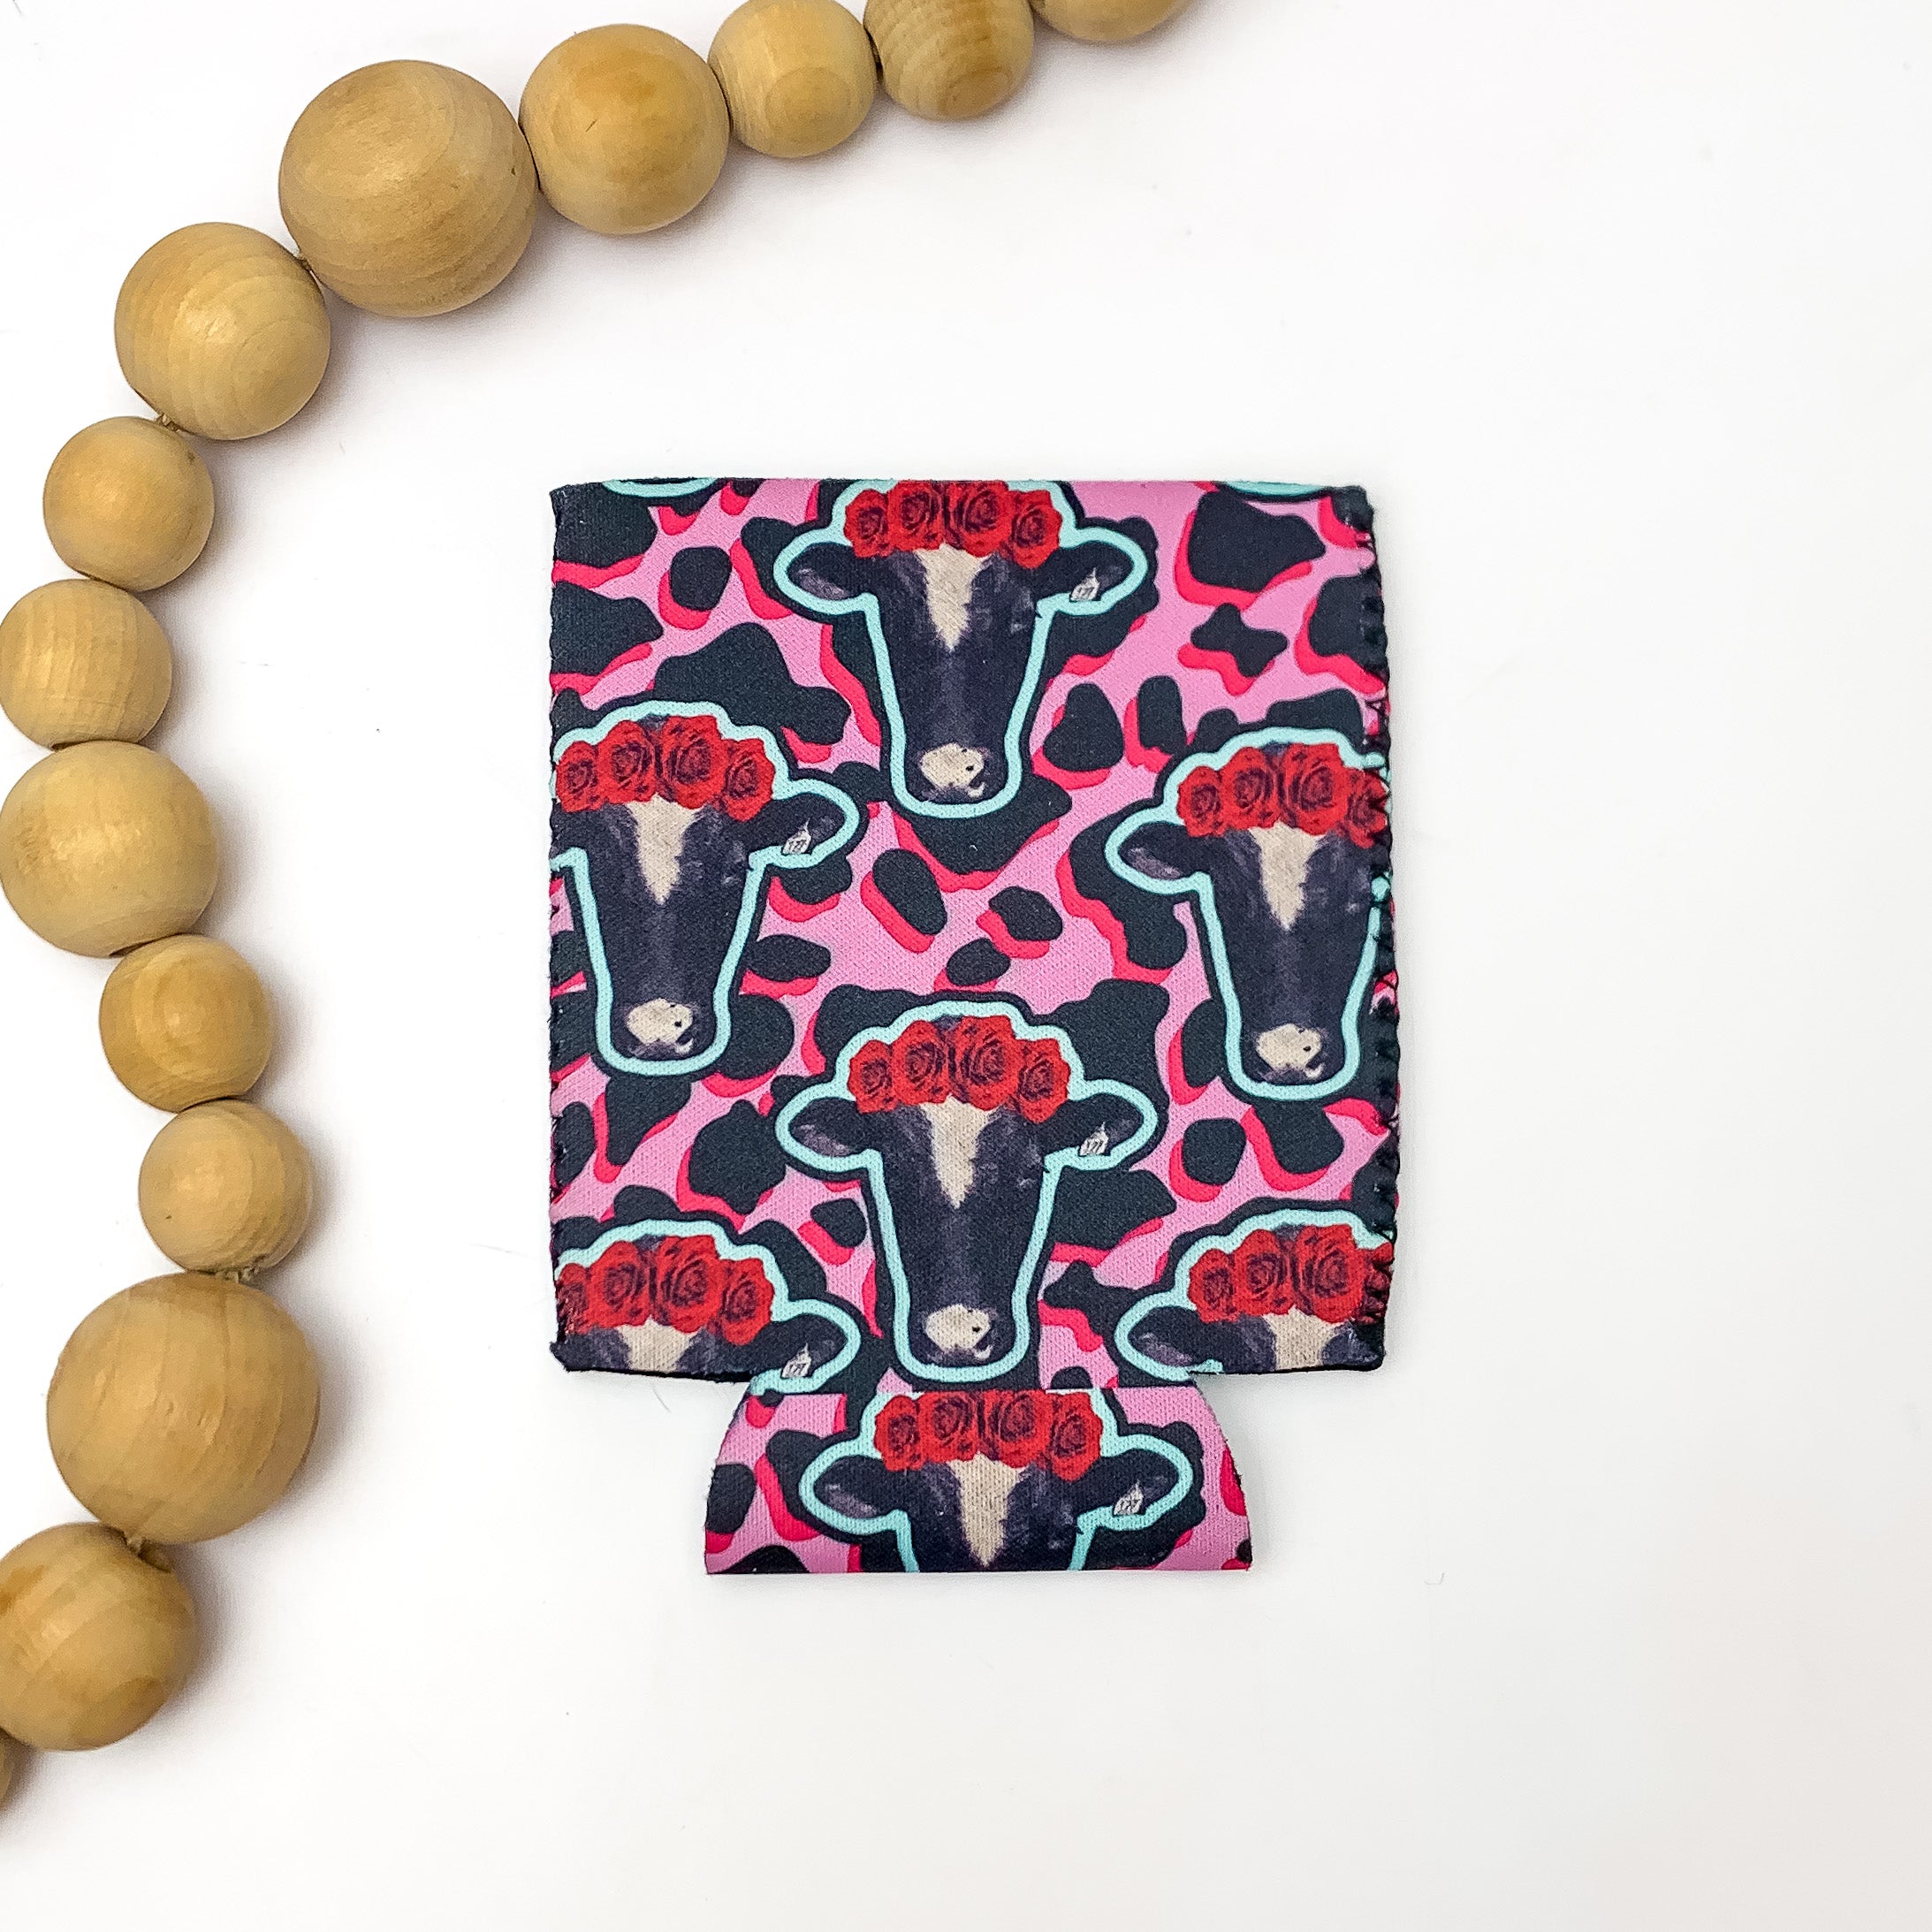 Cow Head Print with Pink and Black Cow Print Koozie. Pictured on a white background with wood beads to the left of the koozie.